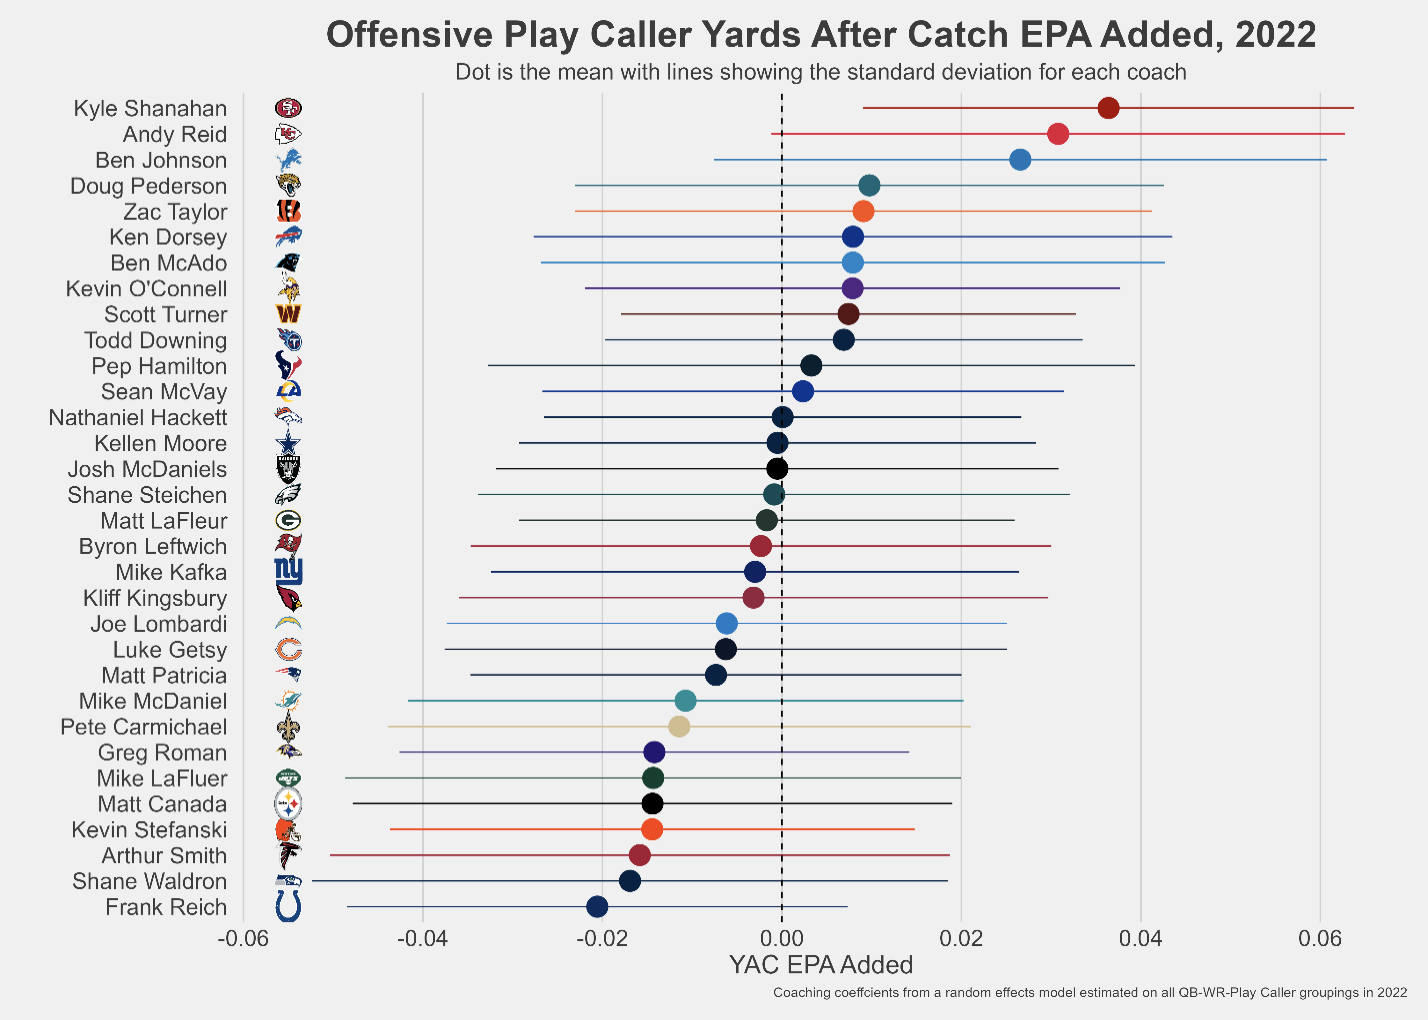 Chart: Offensive Play Caller Yards After Catch EPA Added, 2022